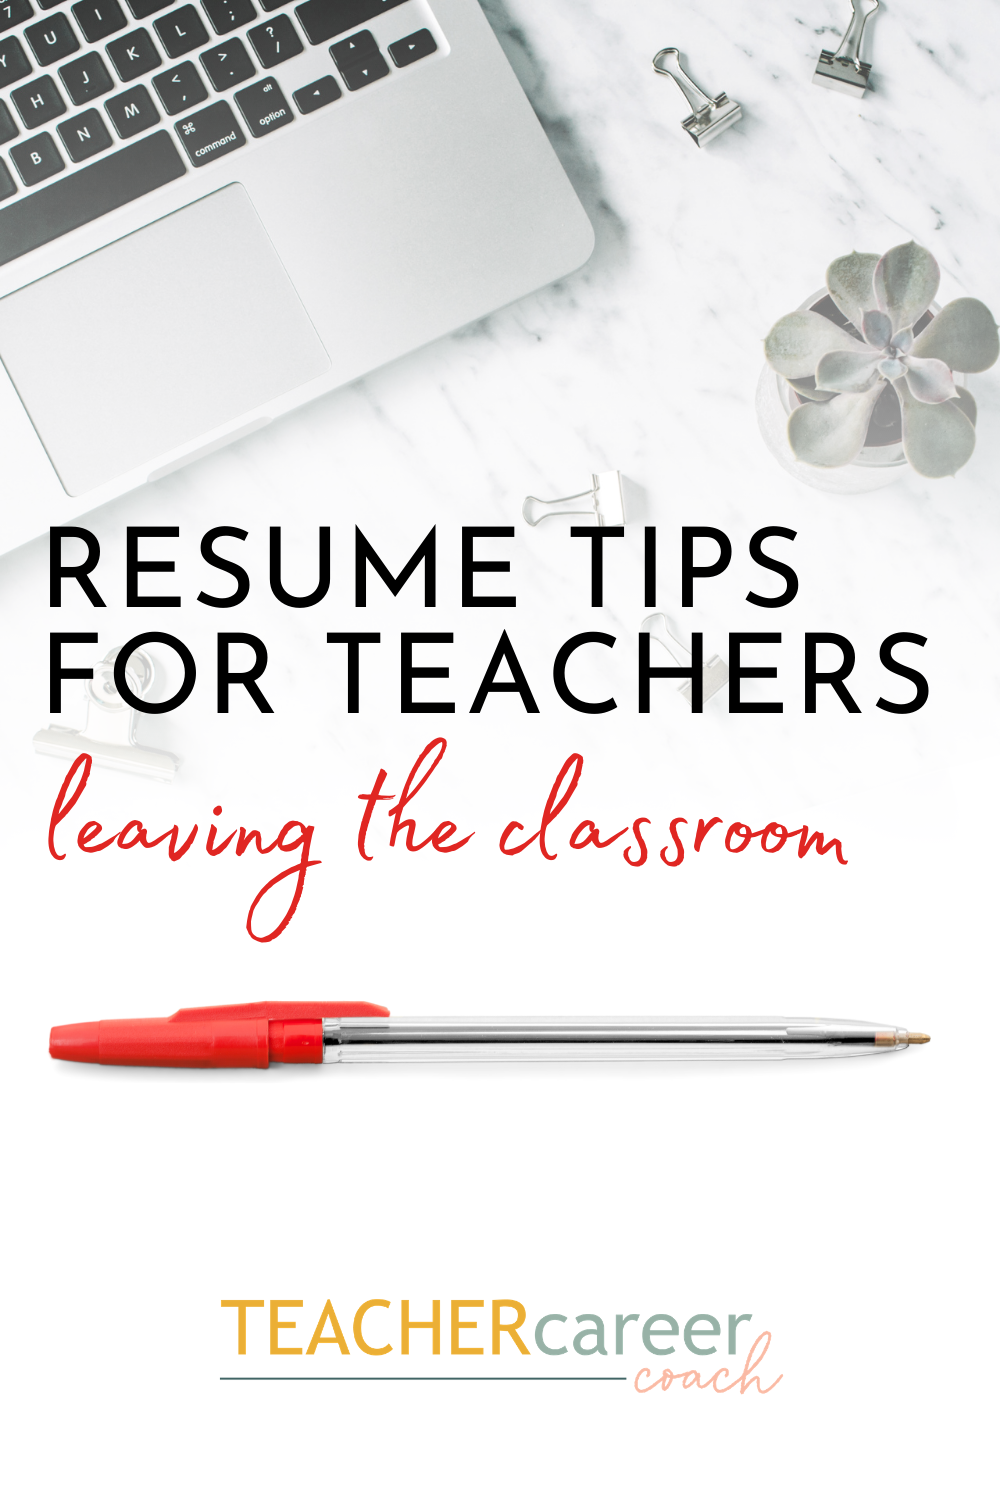 If you want to land that new job, you'll have to work hard on your teacher career change resume. Your resume is your first impression, and you want to put your best foot forward! Read on for a few tips on tweaking your teaching-focused resume into one that highlights all your skills and experience that apply to jobs outside of the classroom.